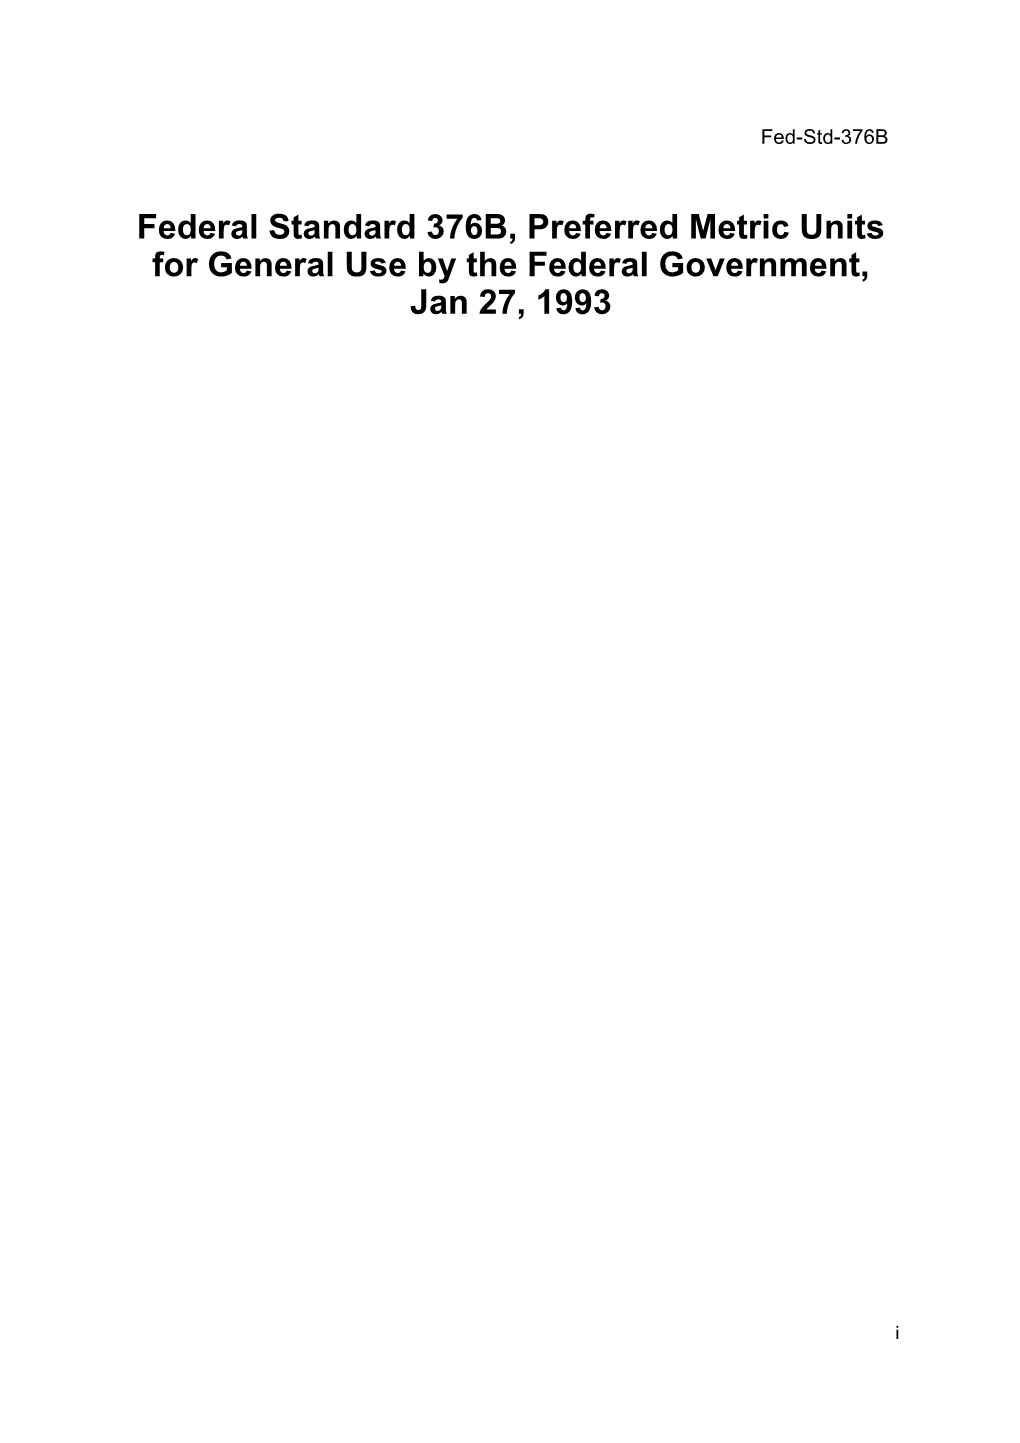 Federal Standard 376B, Preferred Metric Units for General Use by the Federal Government, Jan 27, 1993